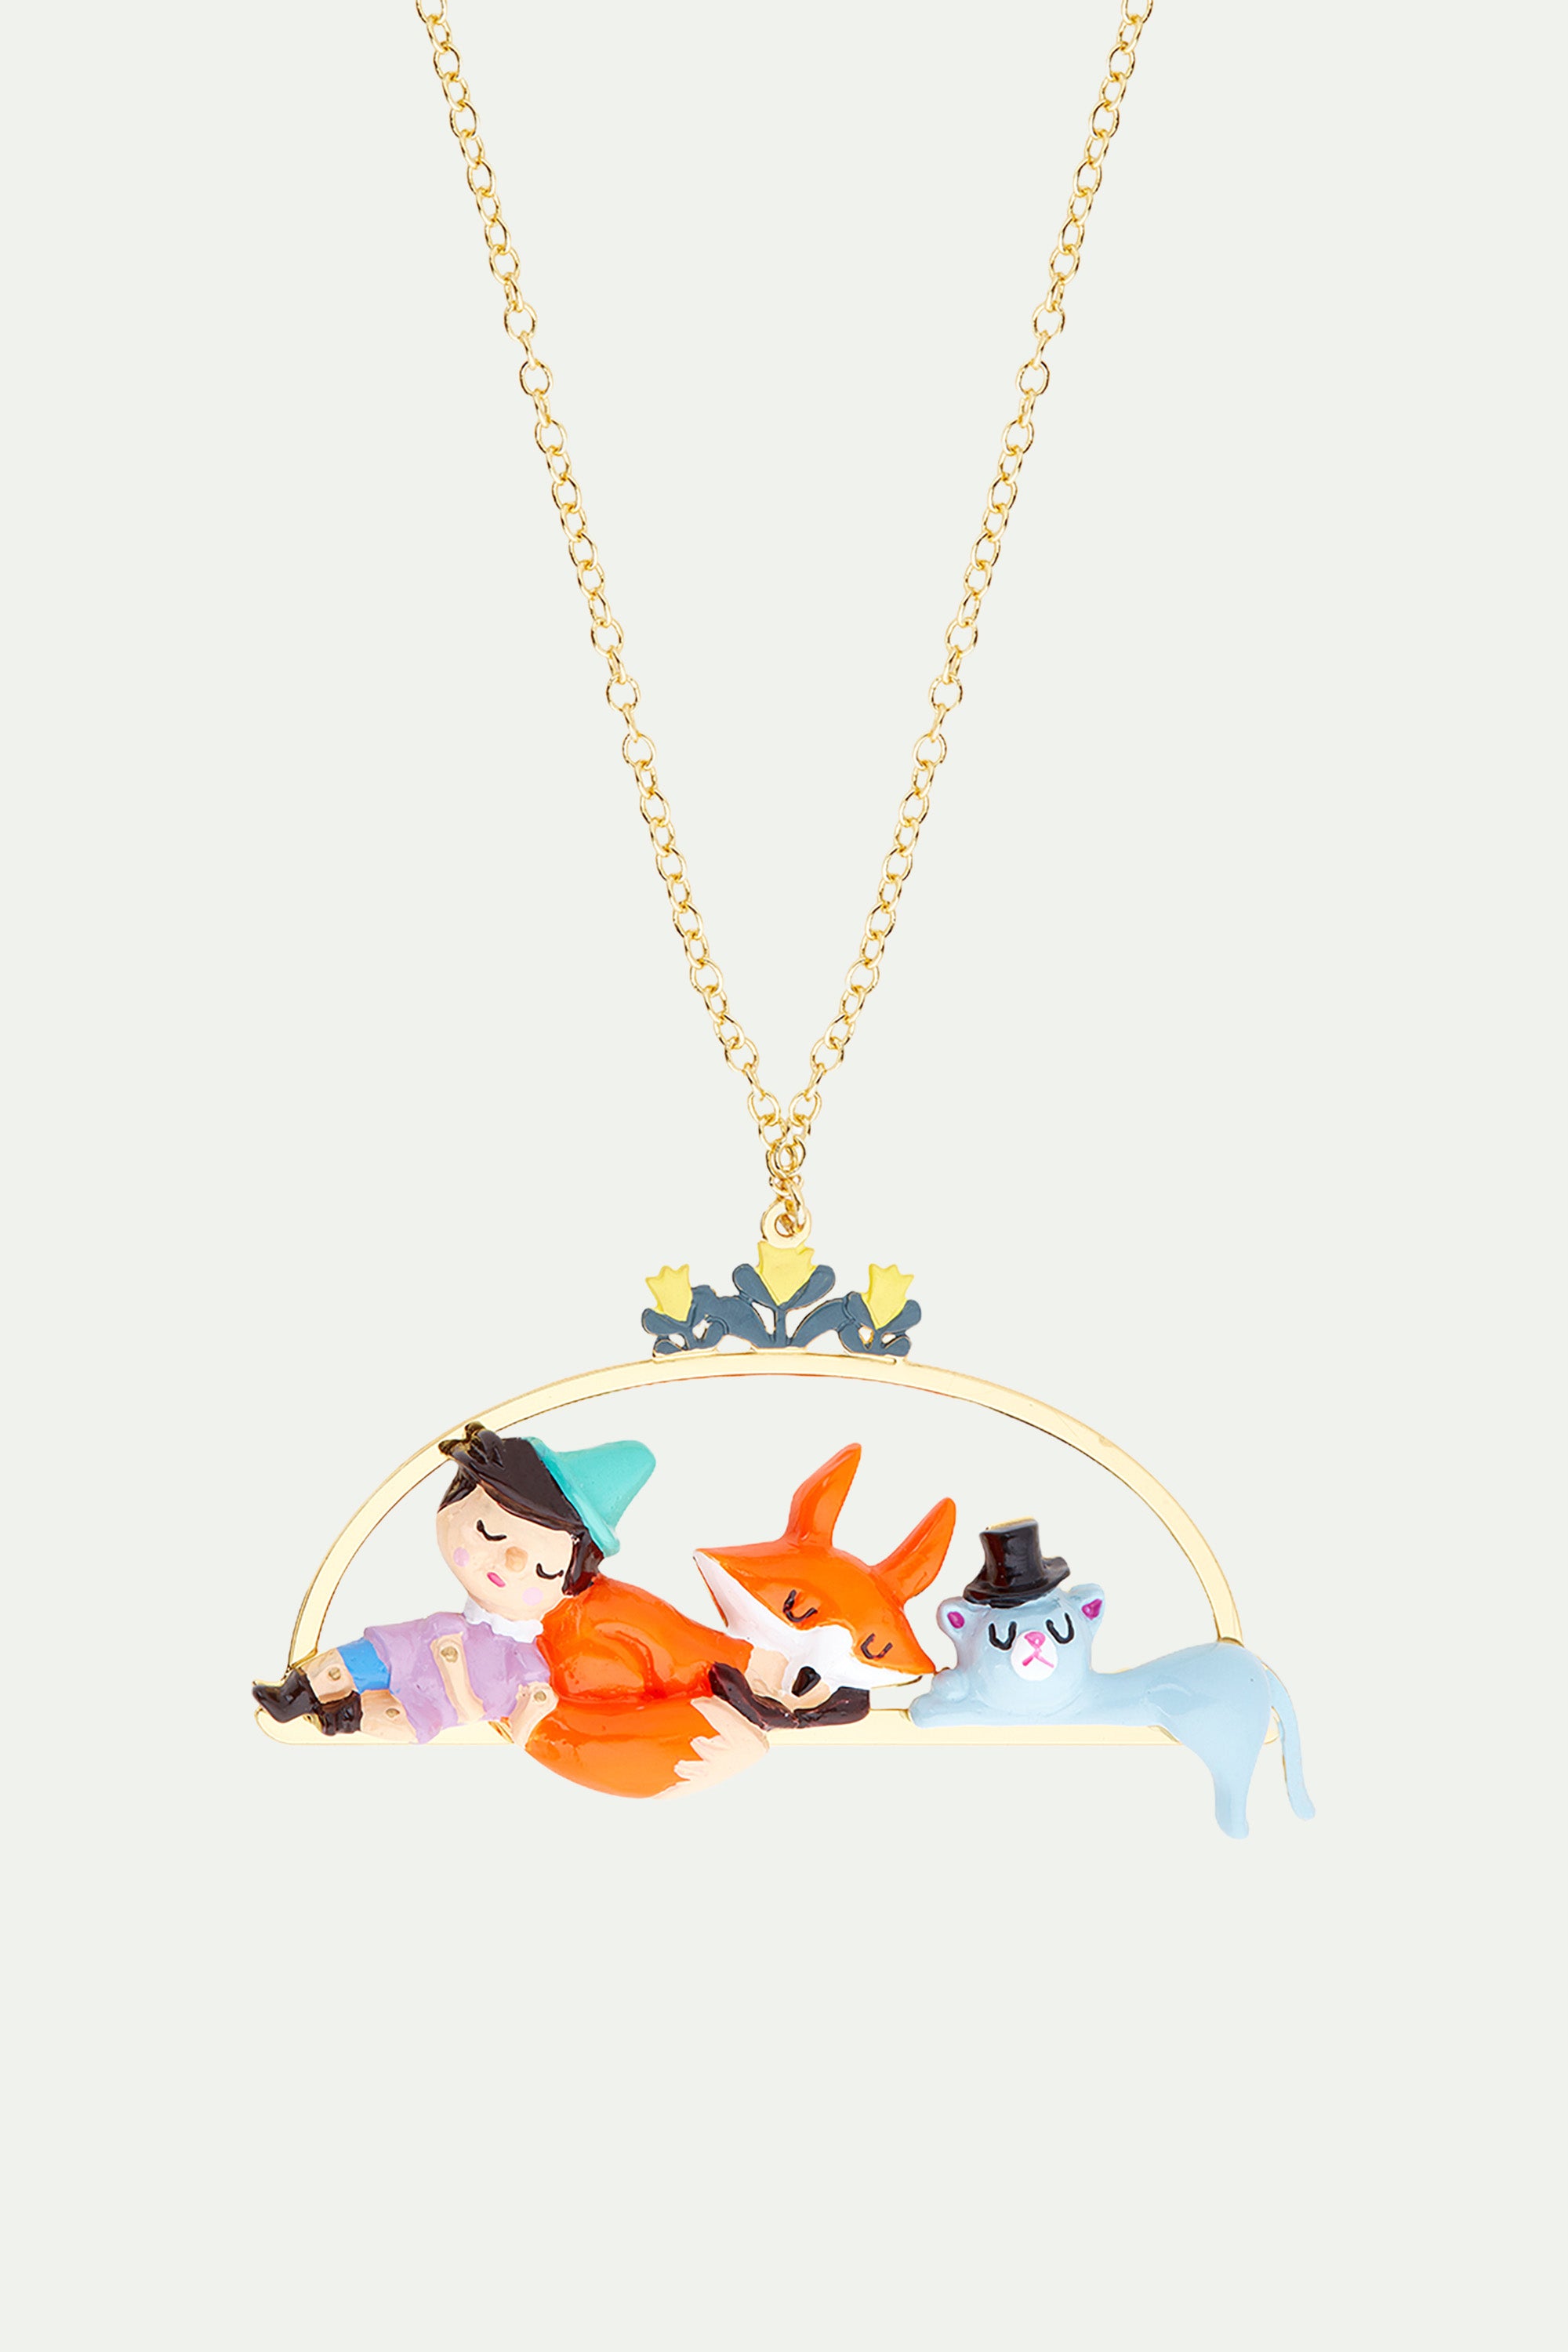 Sleeping Pinocchio and friend necklace